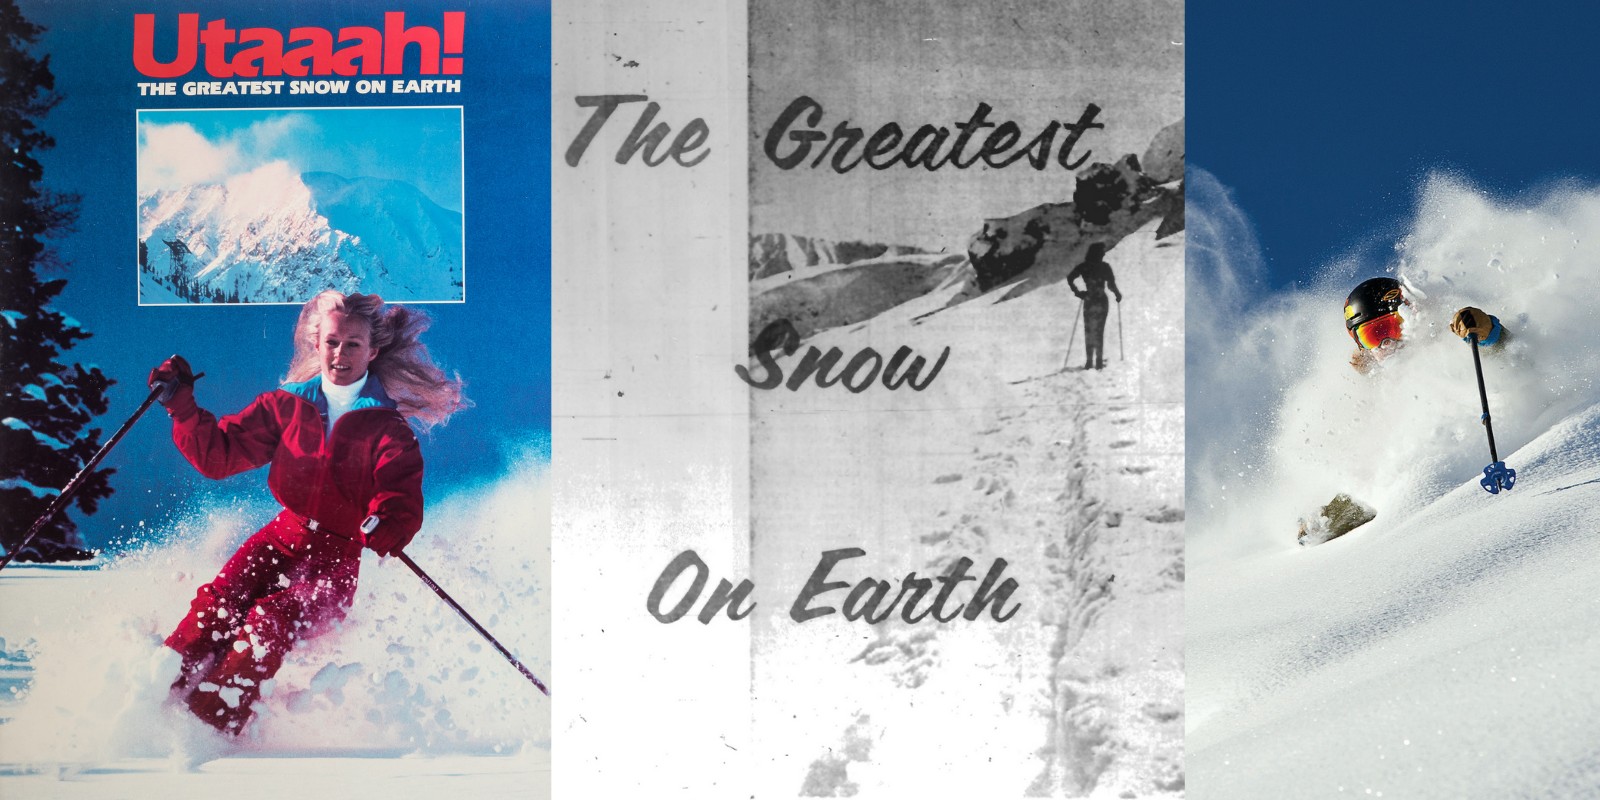 The History of "The Greatest Snow on Earth"